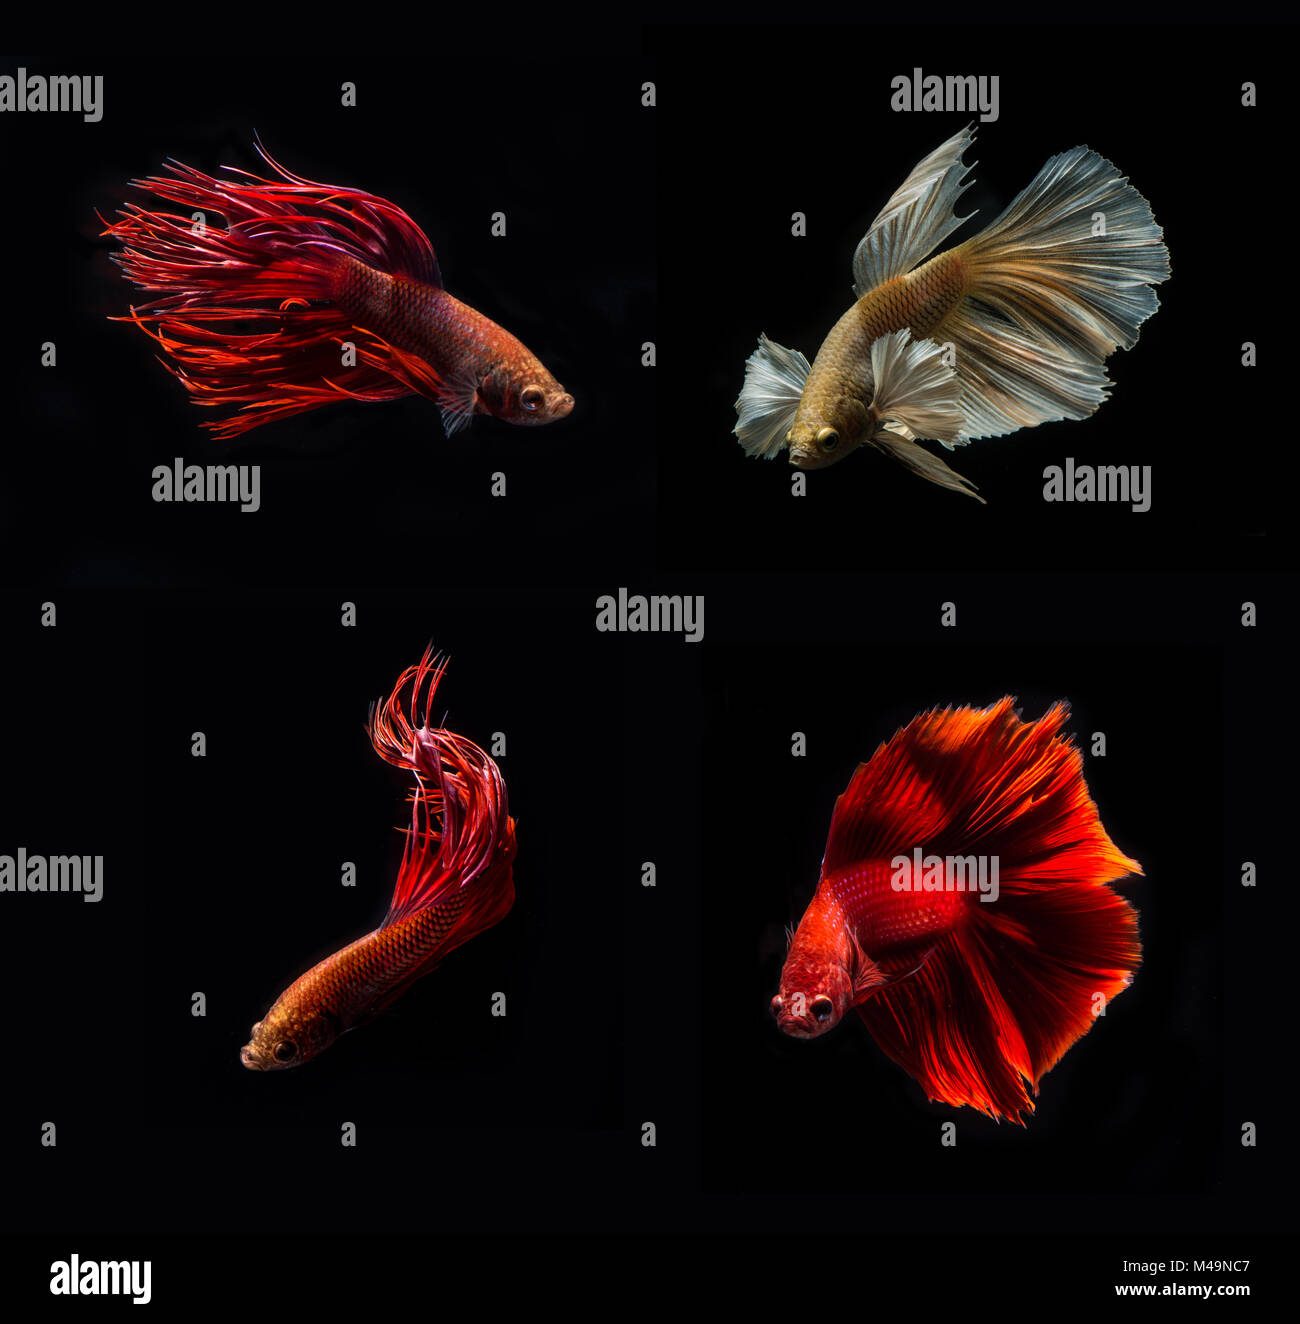 Fighting Fish on black background collection Stock Photo